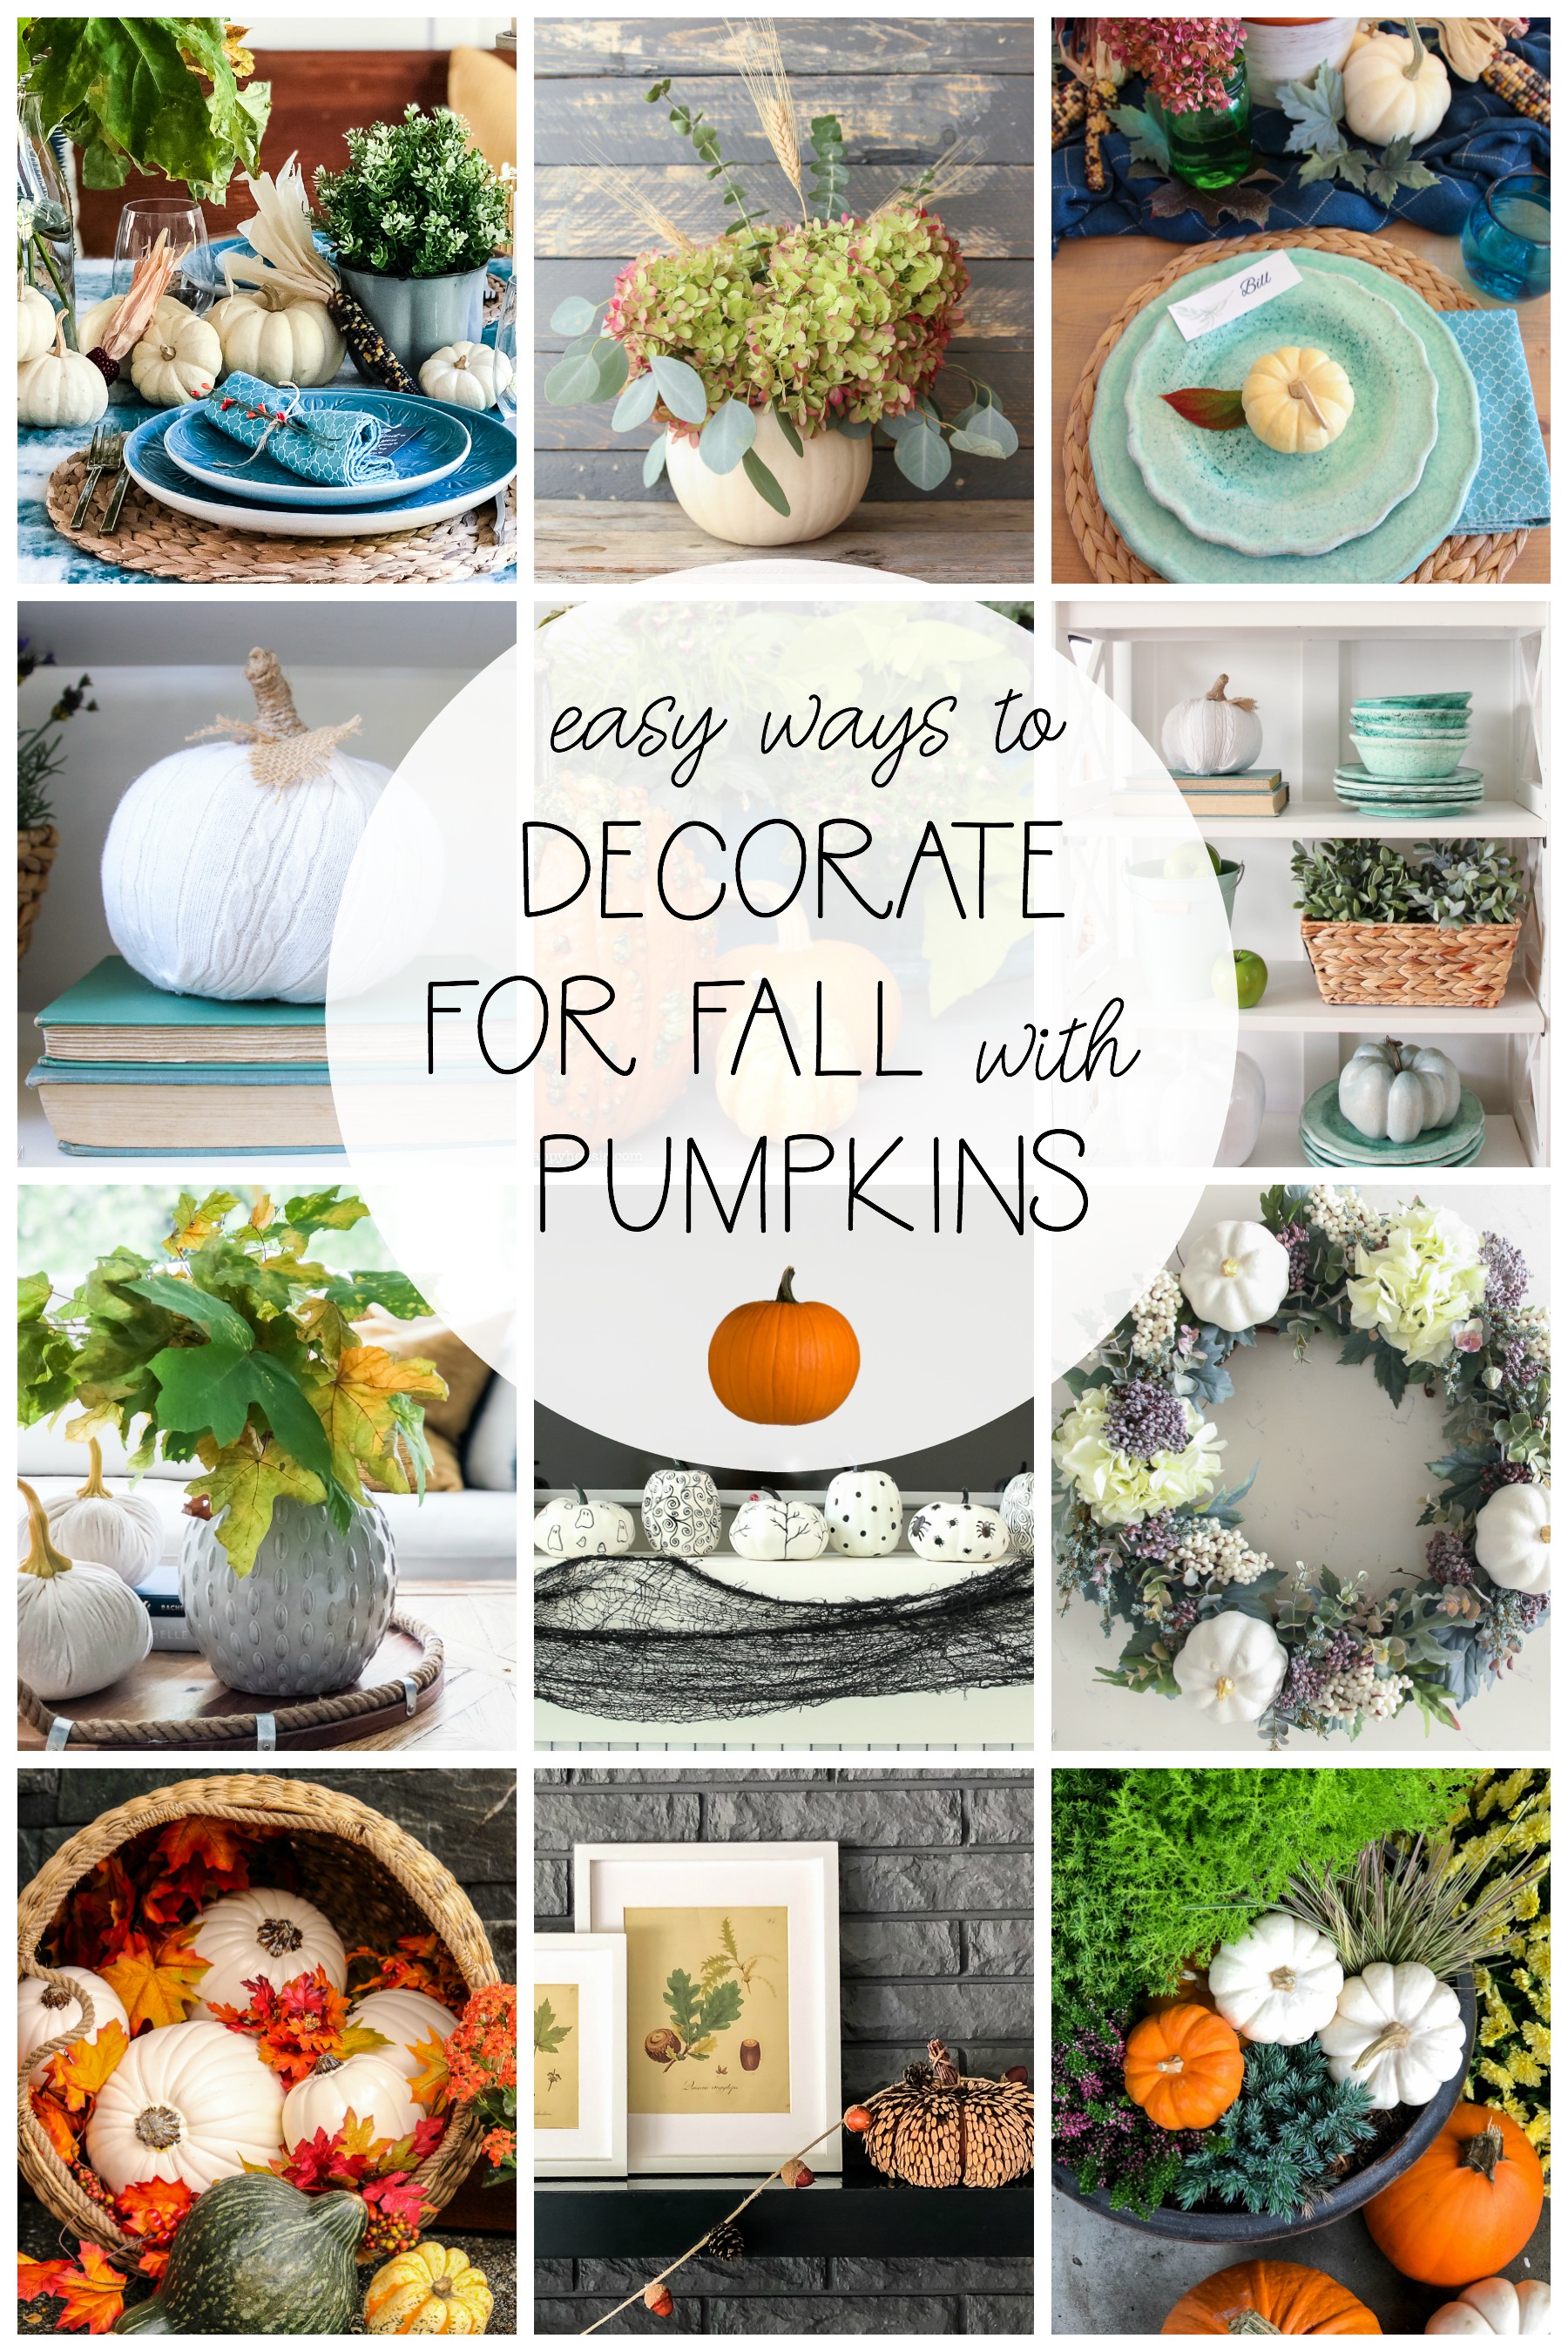 Easy Ways To Decorate For Fall With Pumpkins poster.